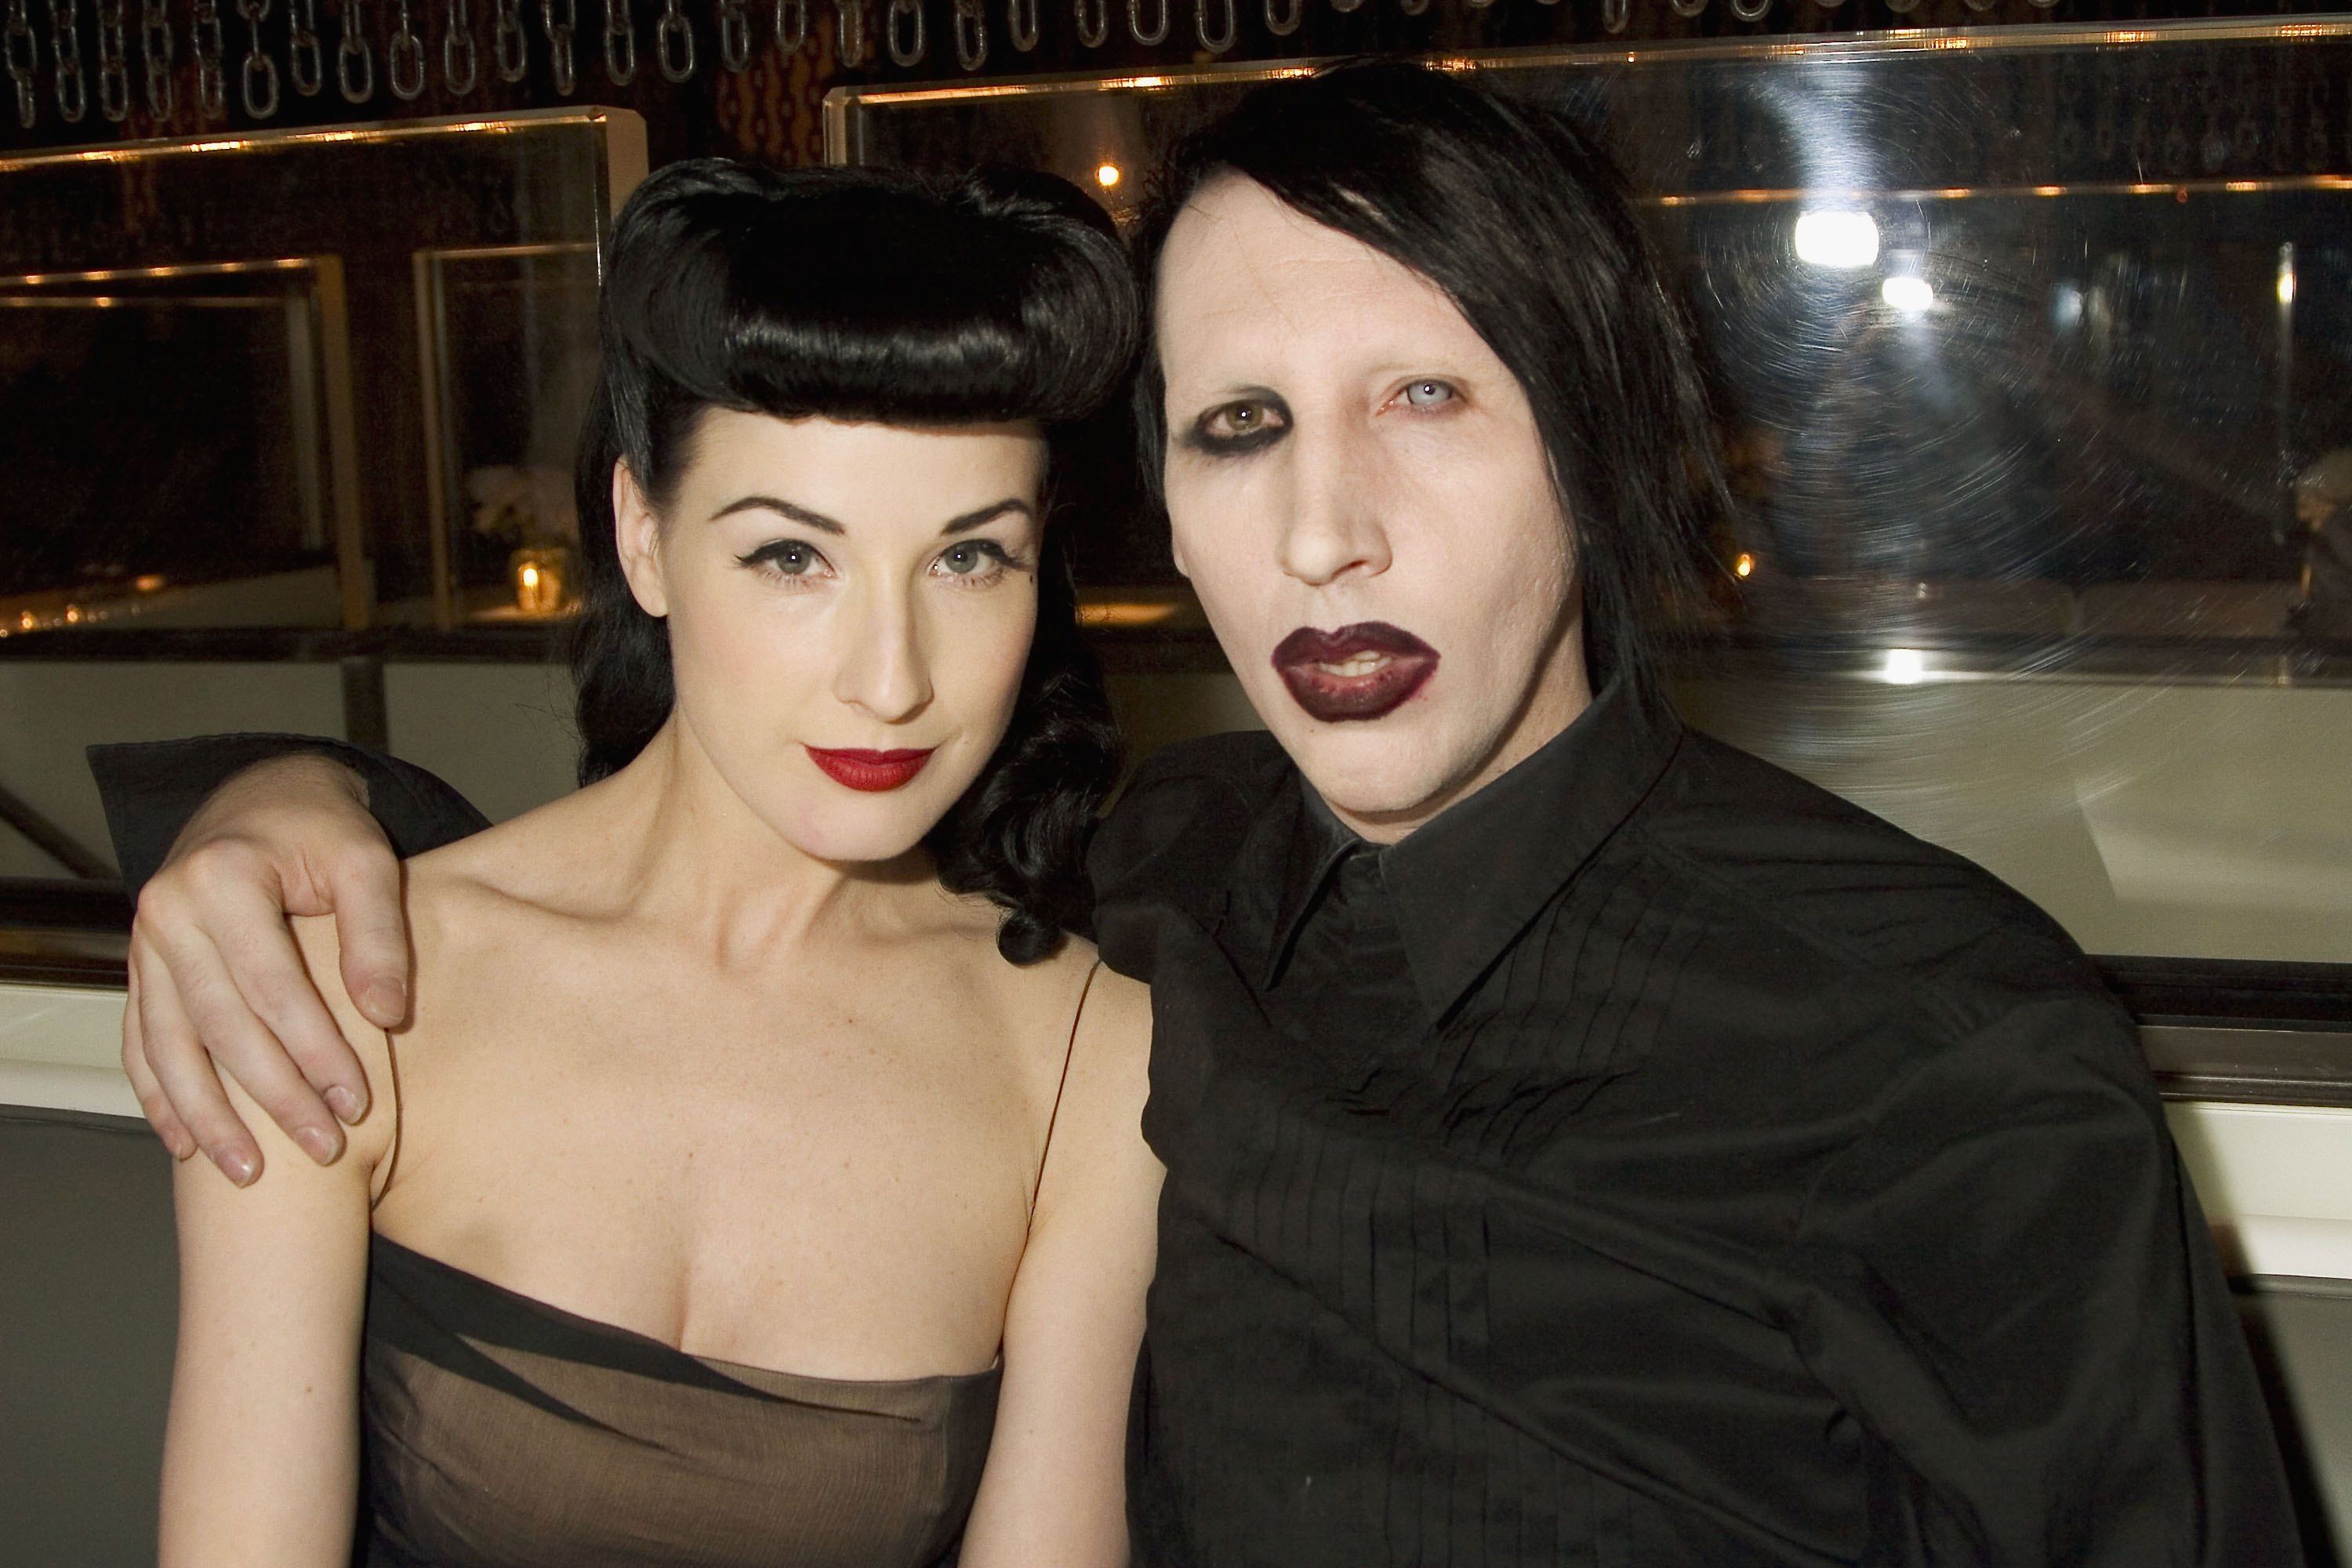 Dita Von Teese and Marilyn Manson at the opening of MR CHOW Tribeca on May 4, 2006, in New York City | Photo: Astrid Stawiarz/Getty Images